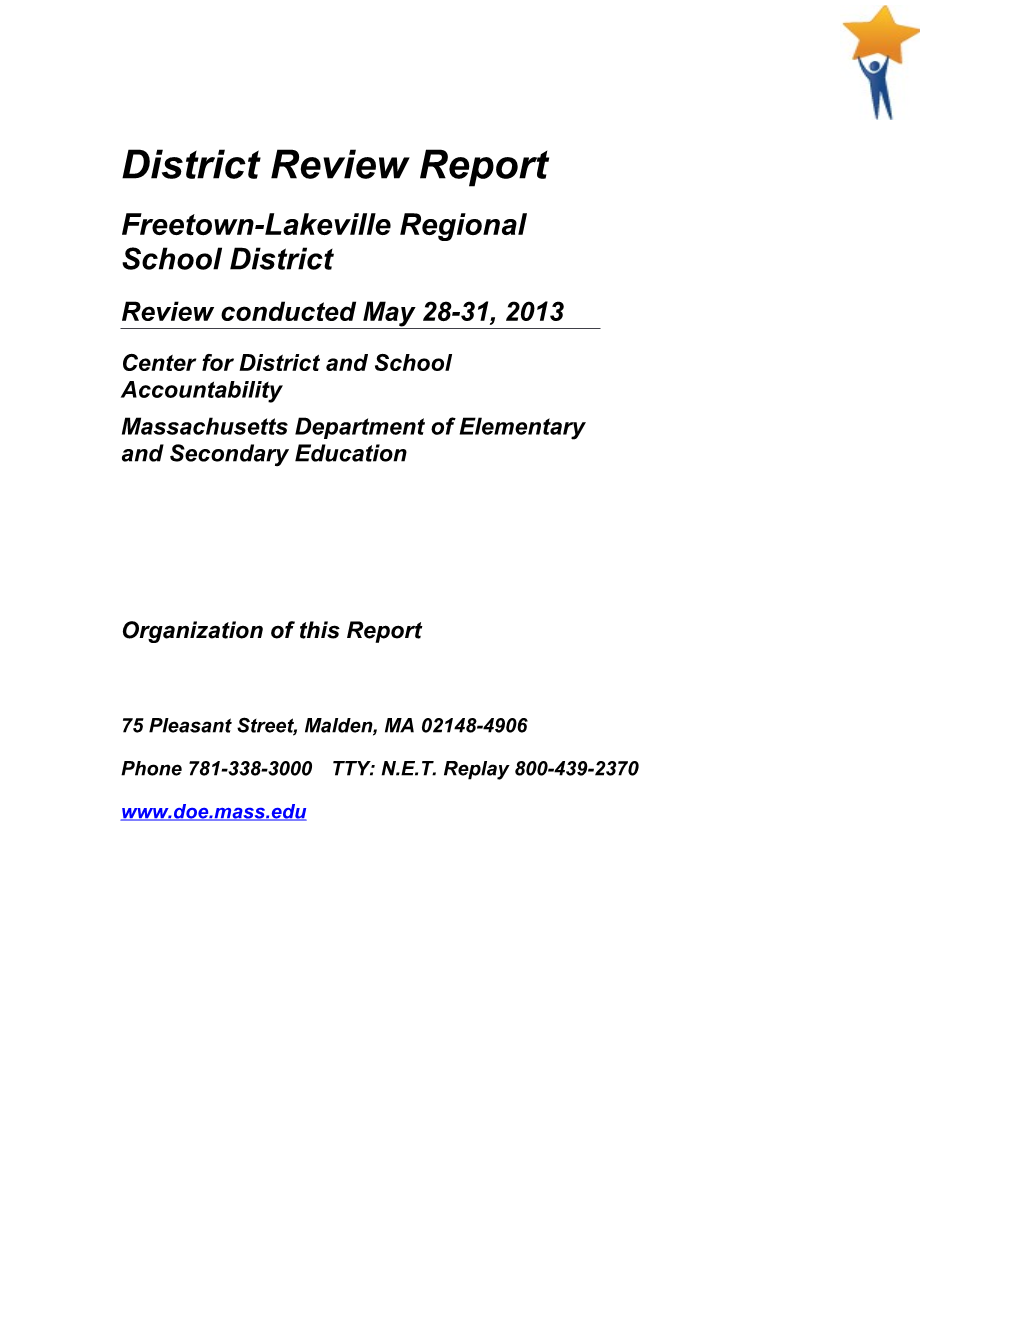 Freetown-Lakeville District Review Report, 2013 Onsite